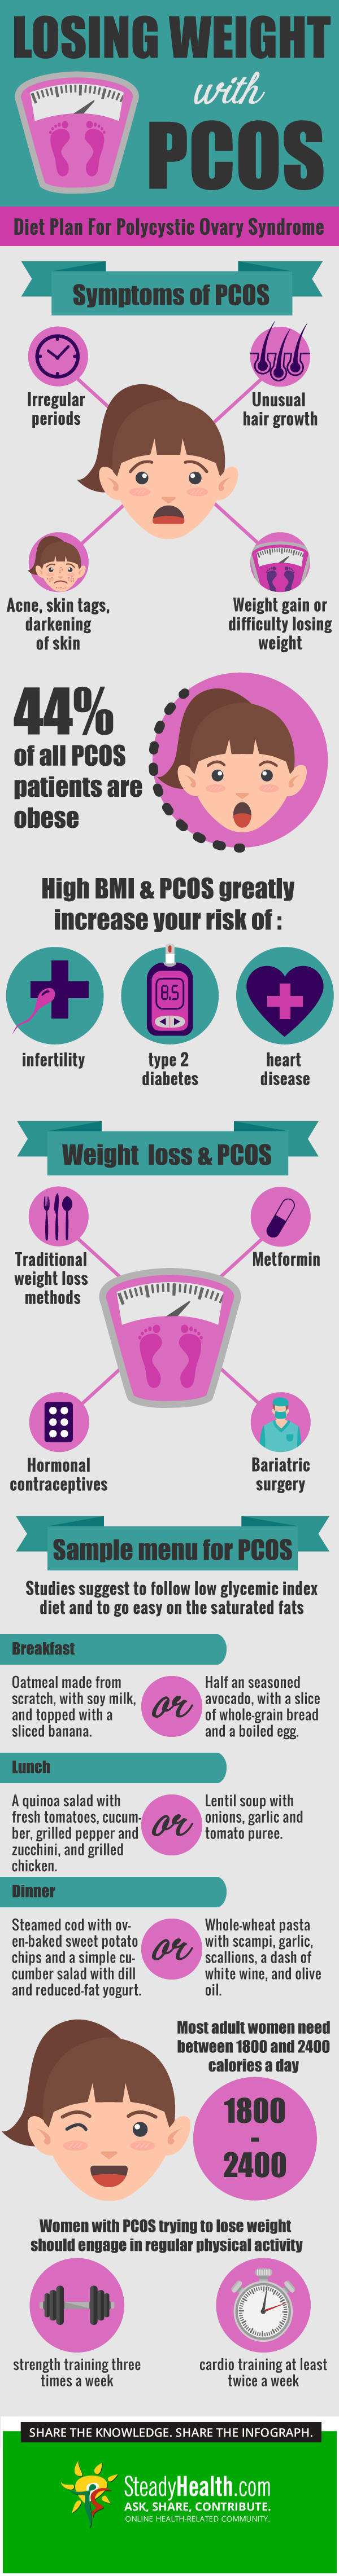 how to lose weight with pcos and diabetes